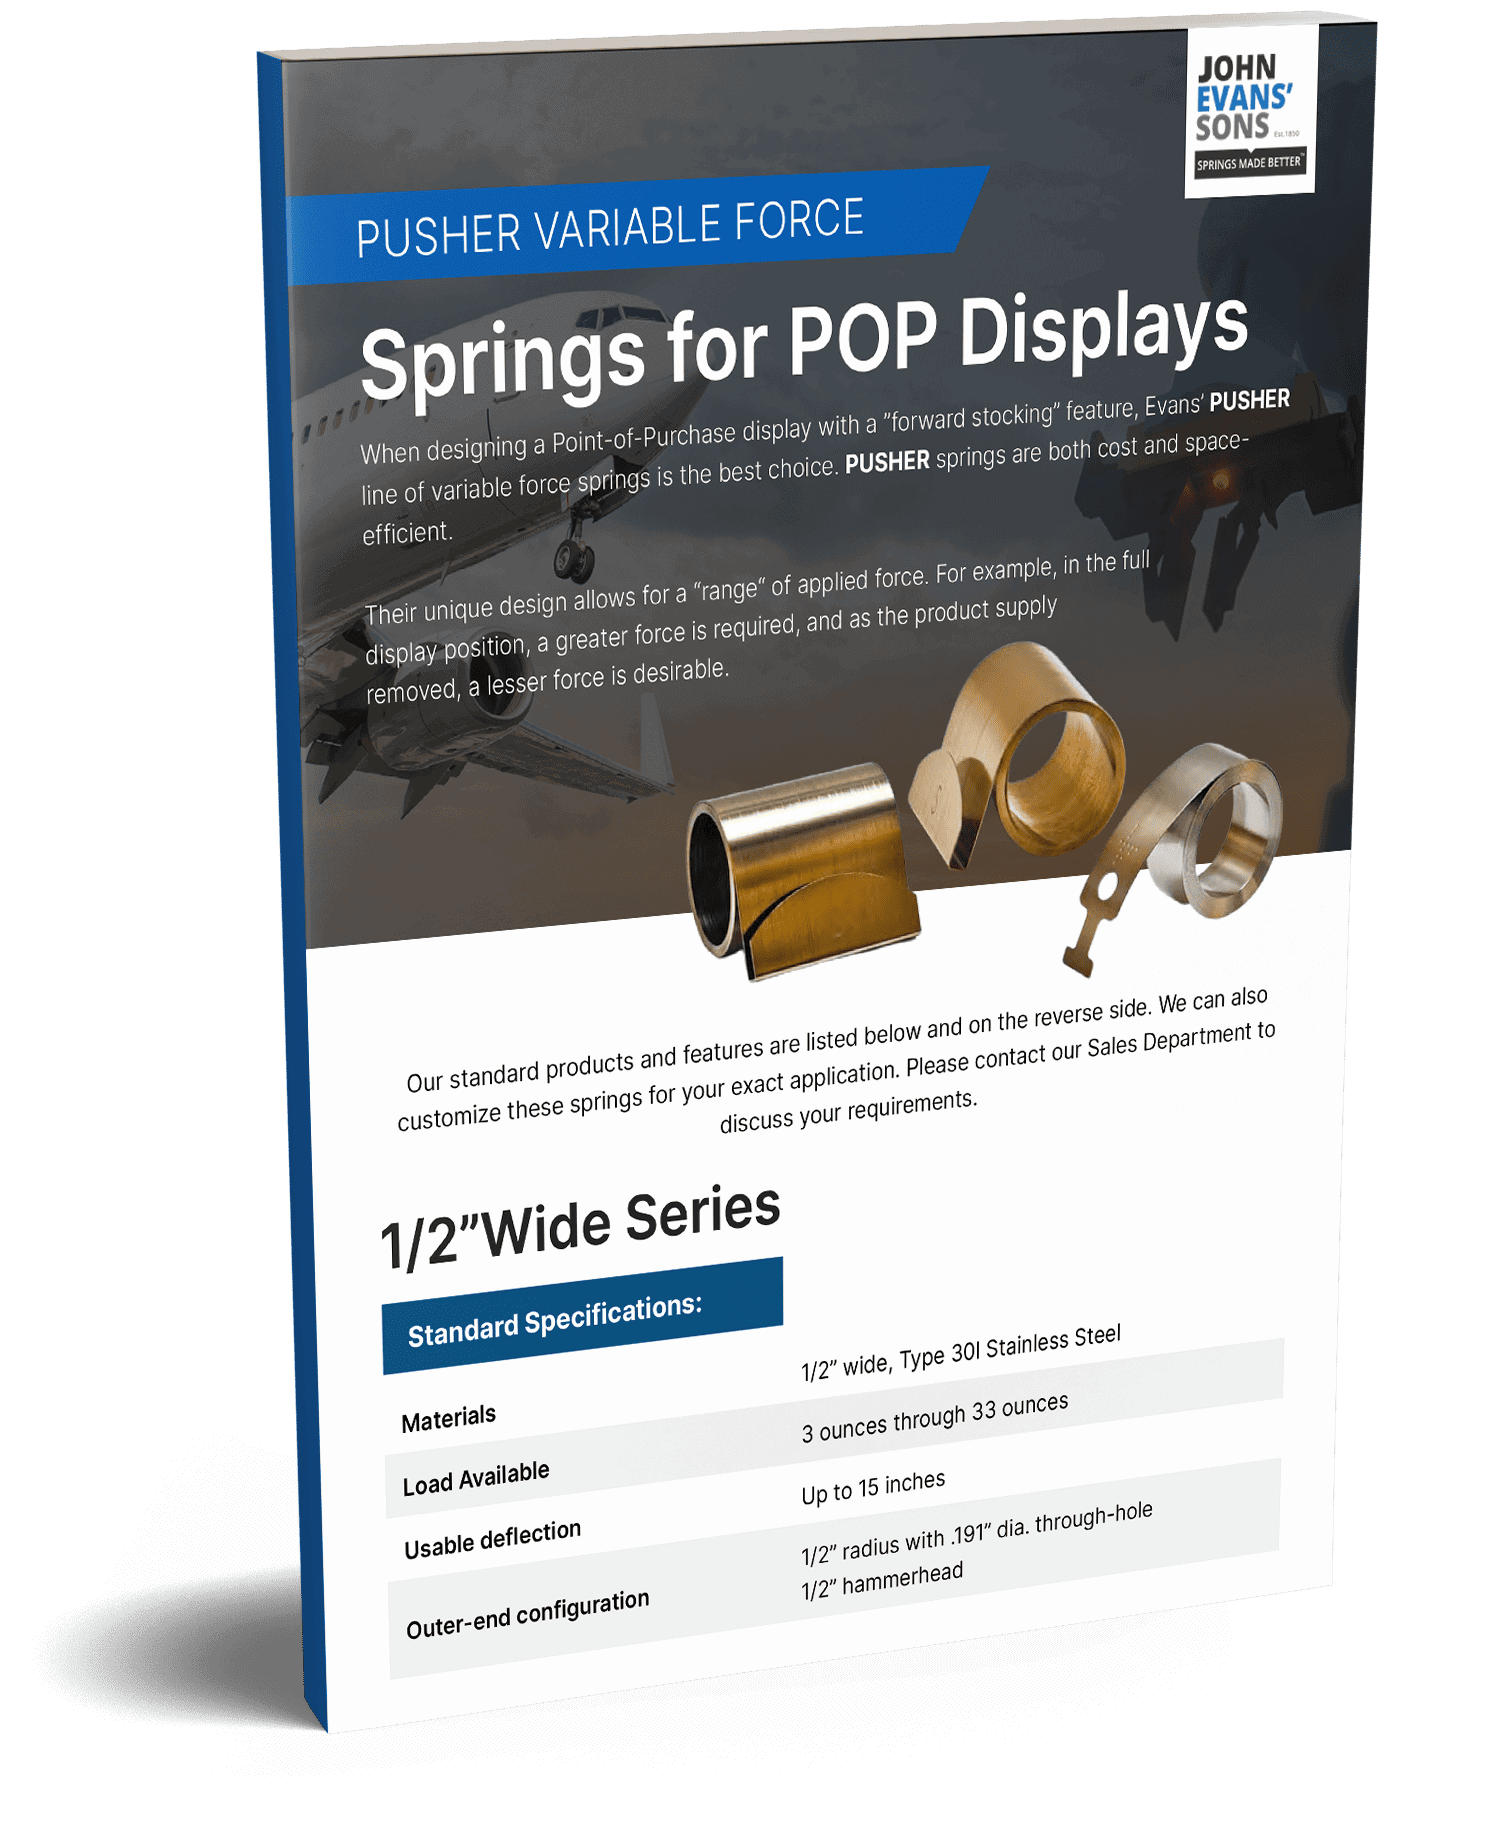 Pusher Variable Force: Springs for POP Displays